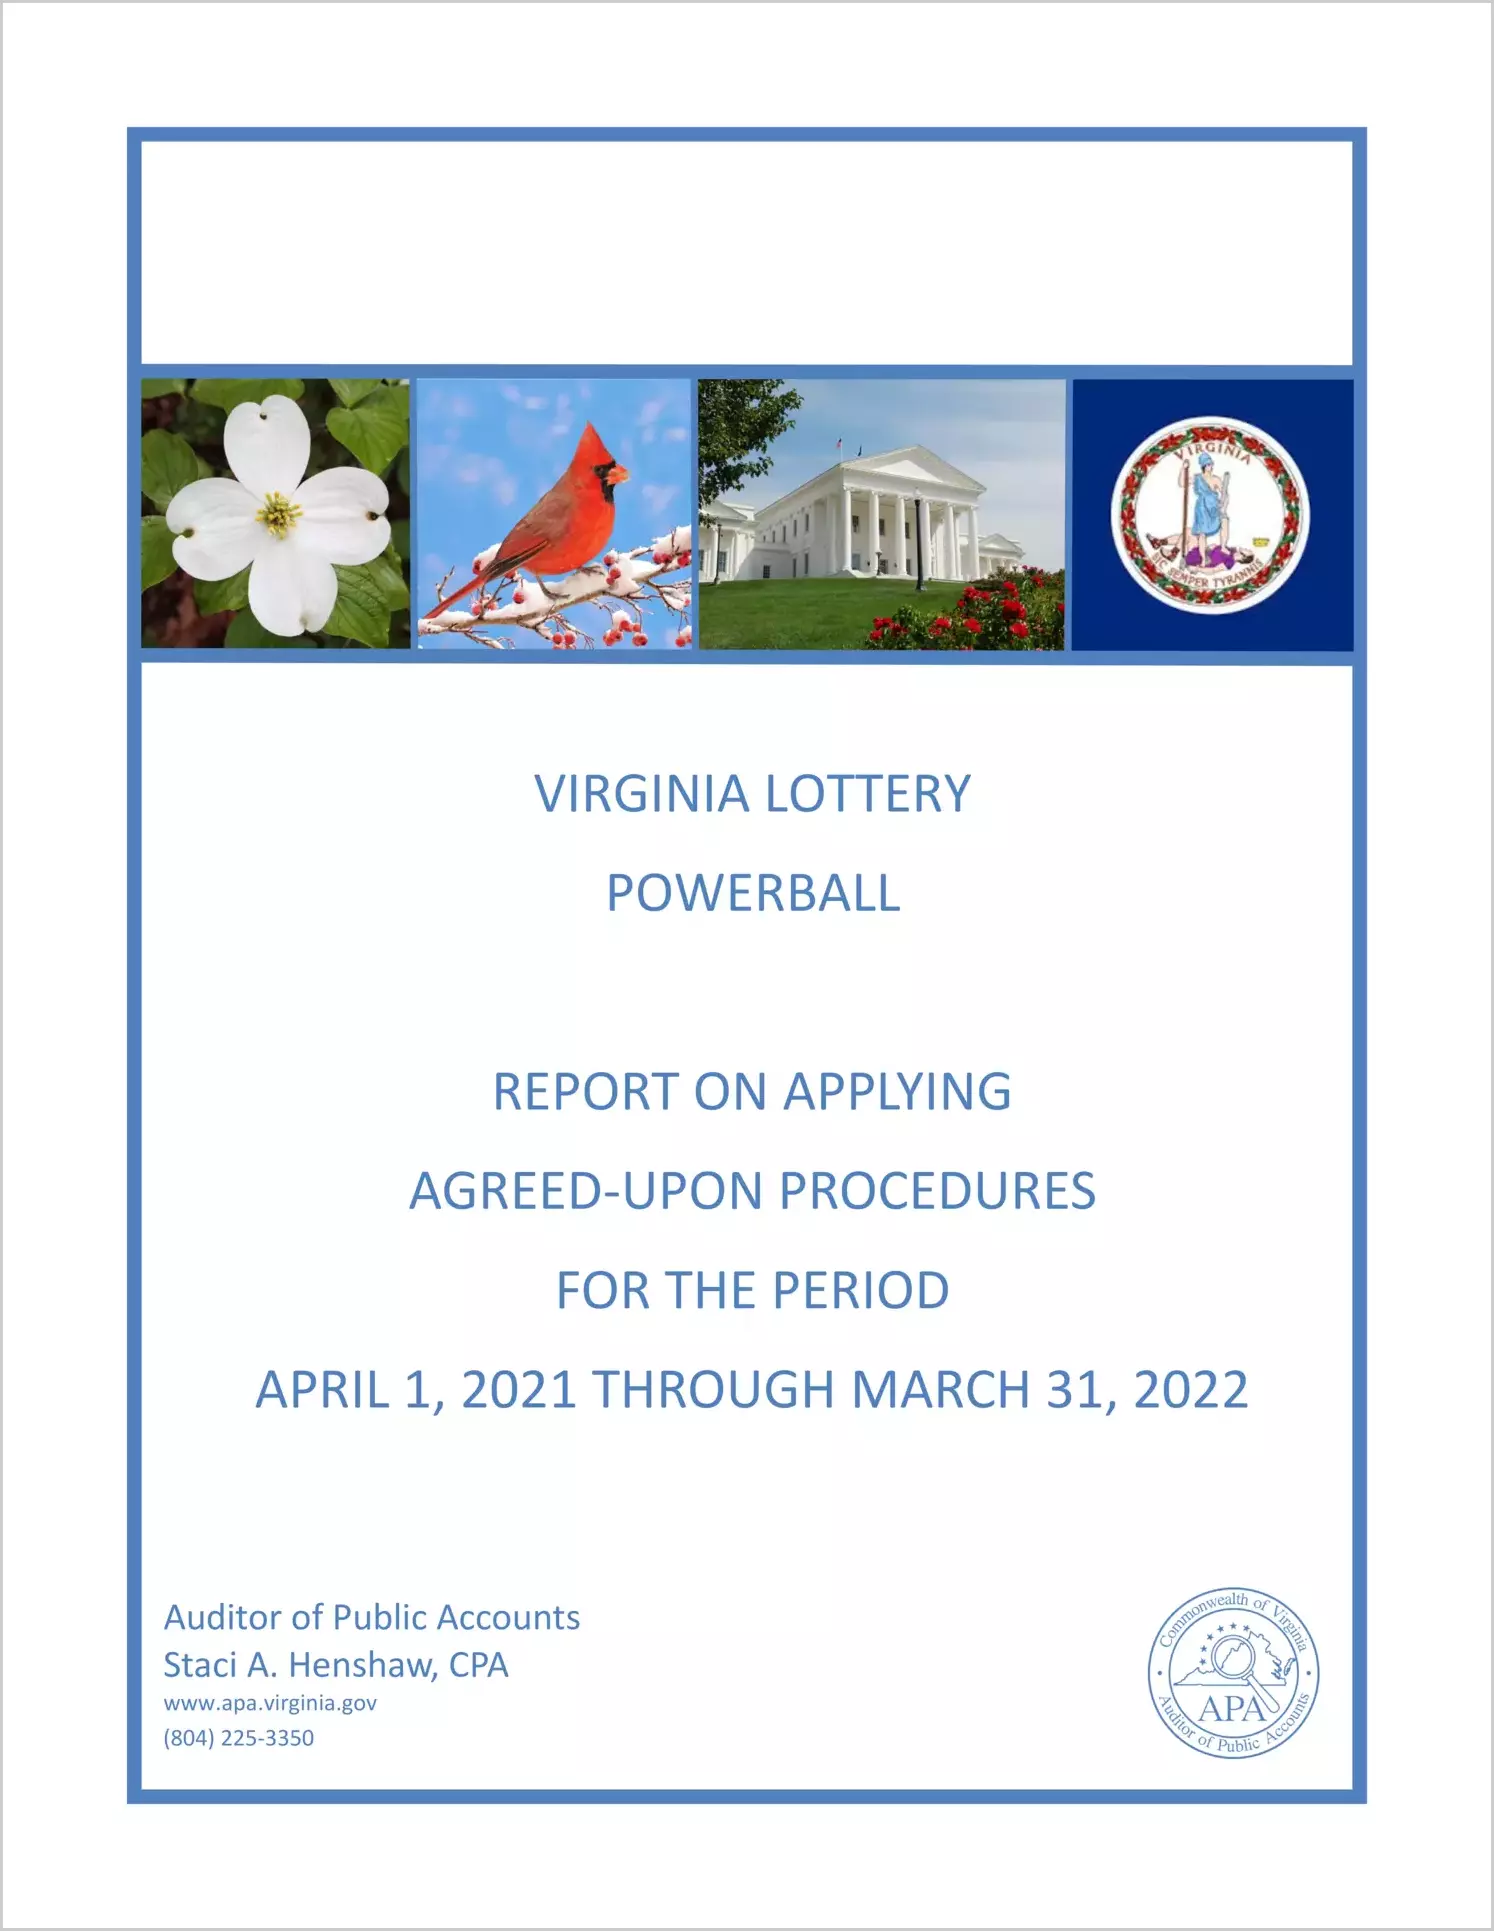 Virginia Lottery Powerball Report on Applying Agreed-Upon Procedures for the period April 1, 2021 through March 31, 2022